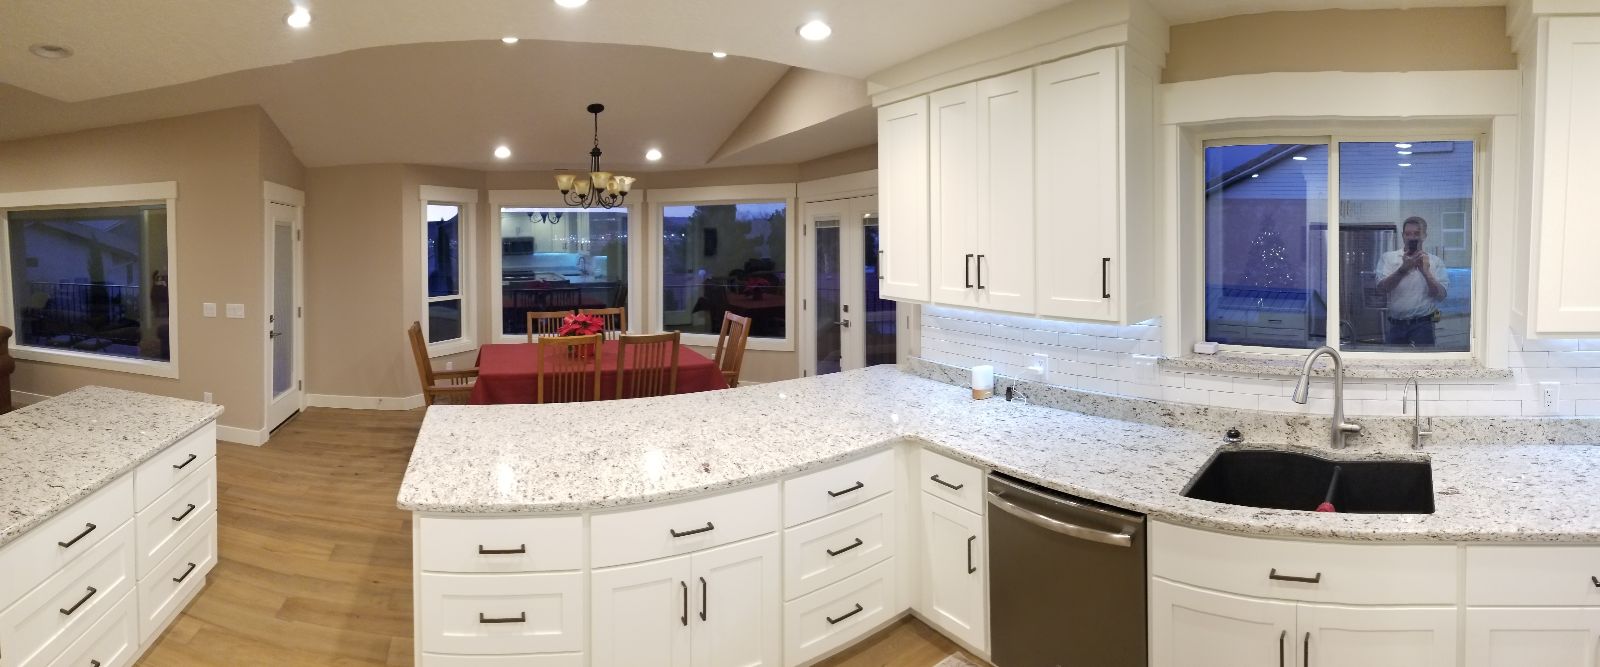 Kitchen view of Dining Area